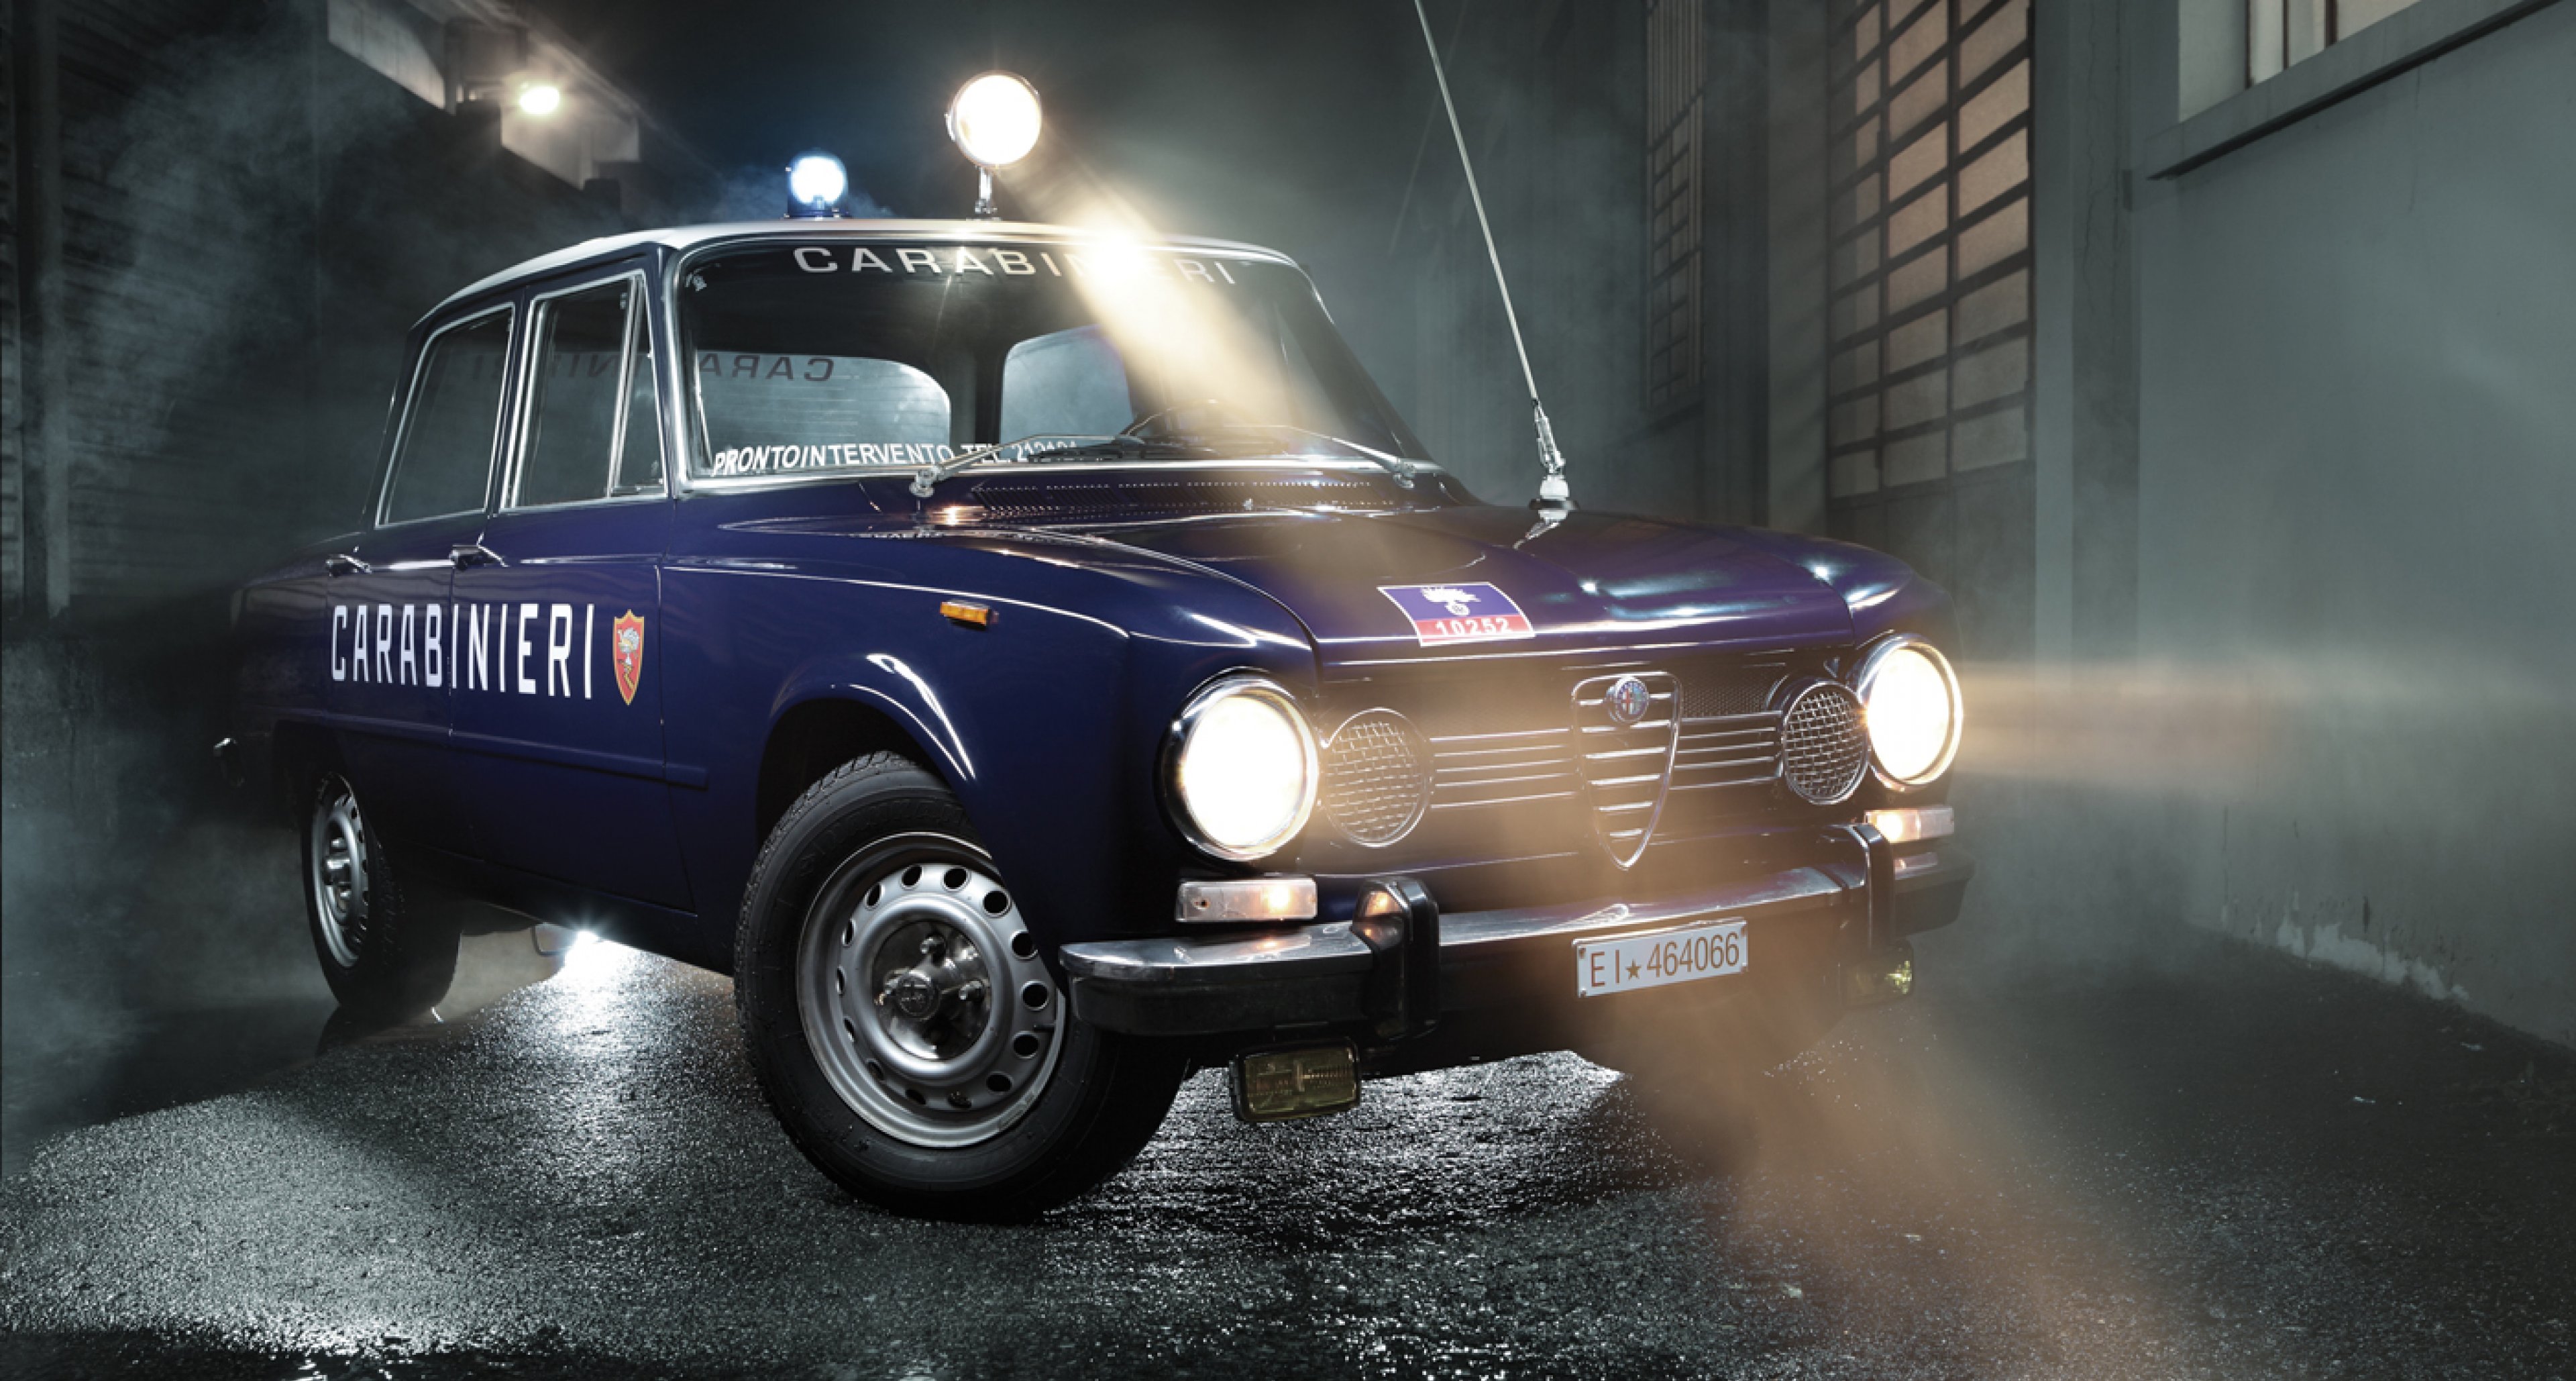 CAF RACER 76 Chase tales with this Alfa Romeo Super Carabinieri